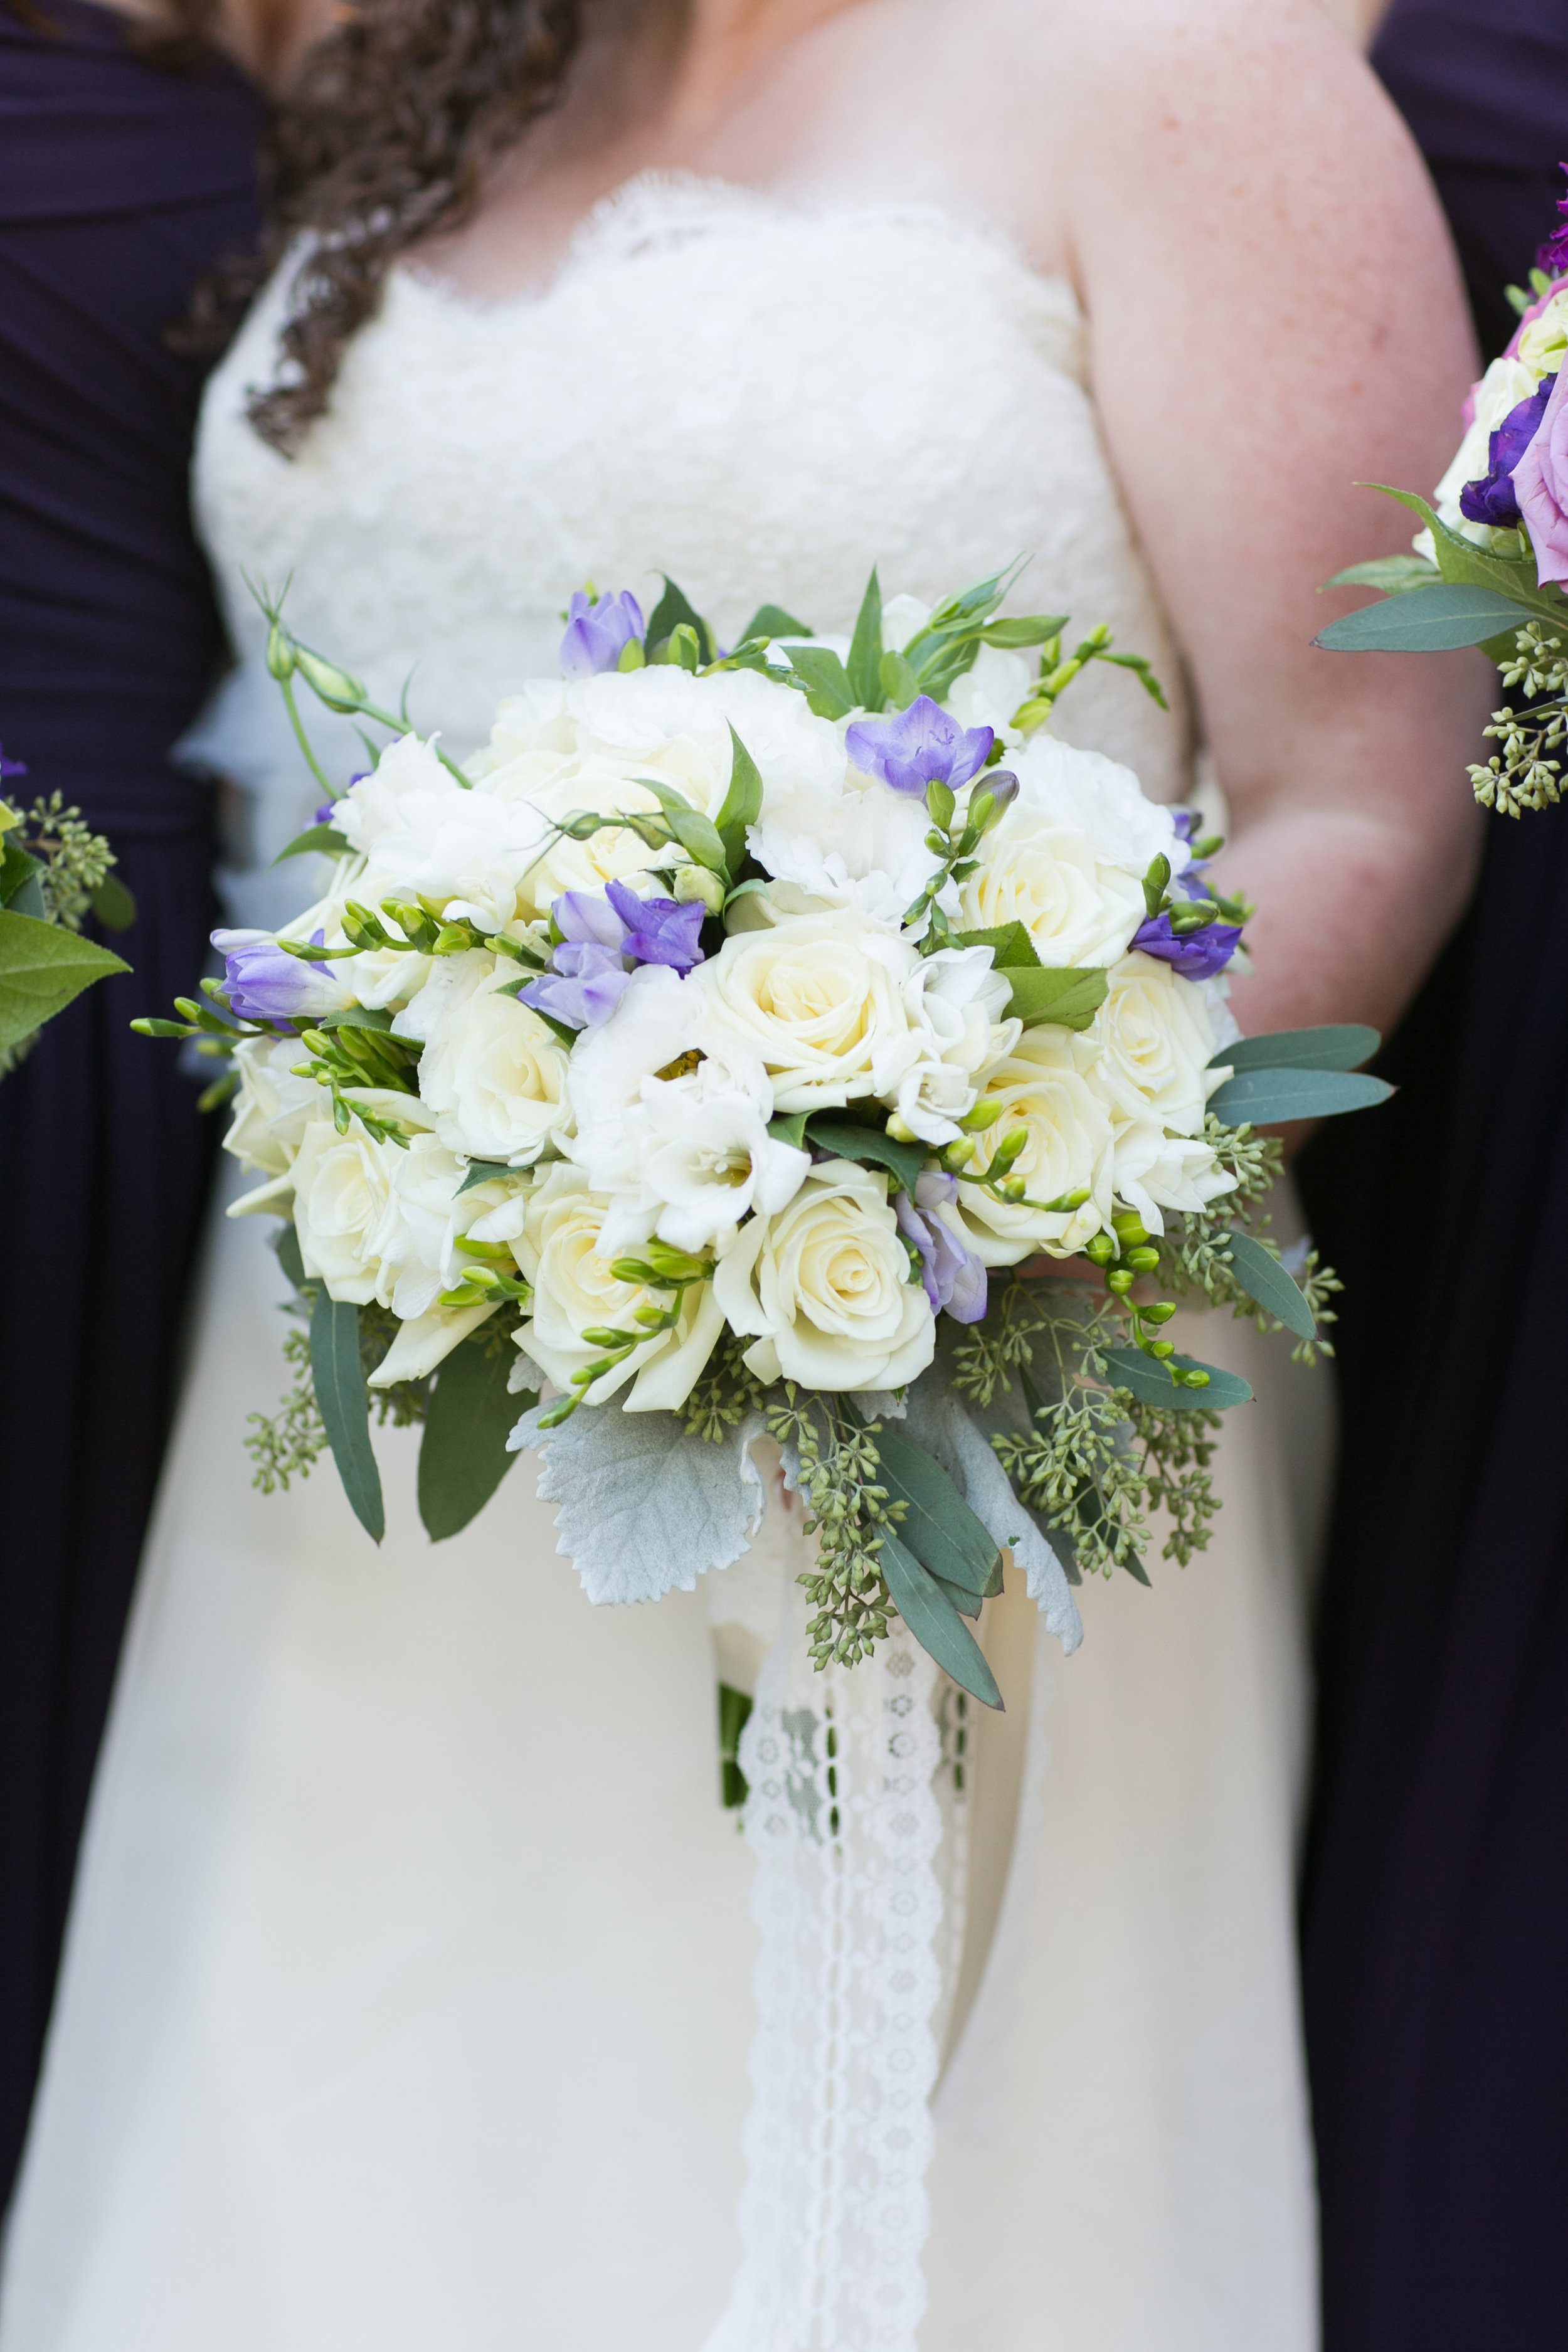 The bridal bouquet and all it's glory! Lavender Freesia, white Freesia, white roses, white Lisianthus, seeded Eucalyptus, gray Dusty Miller leaves and satin and lace ribbons.&nbsp;